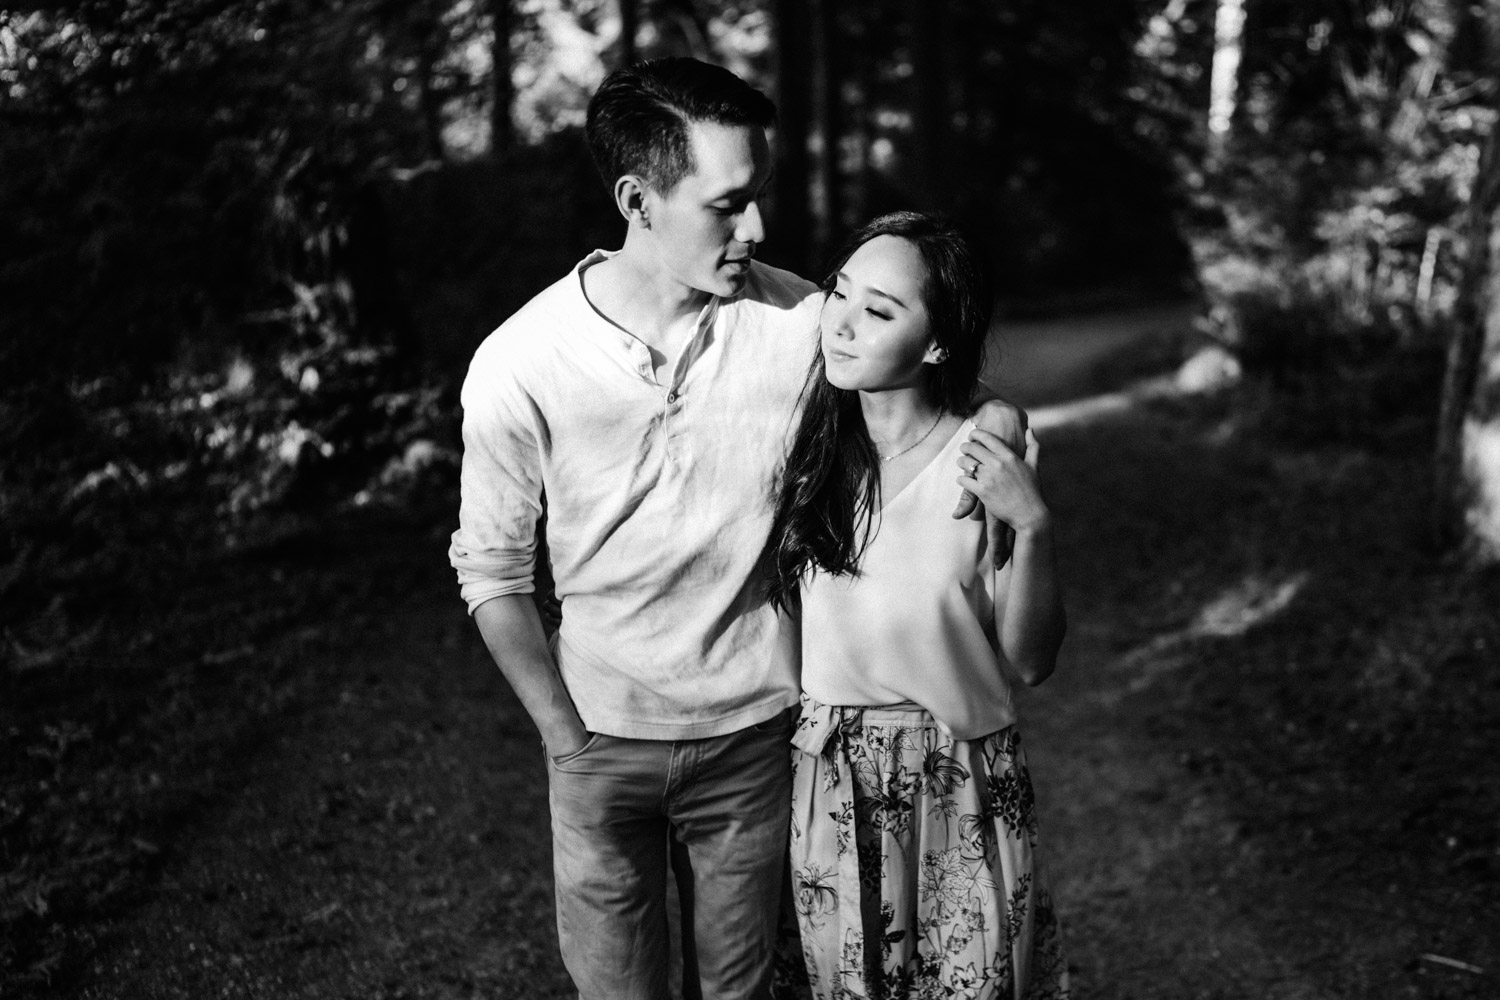 stanley park forest engagement photography in vancouver bc